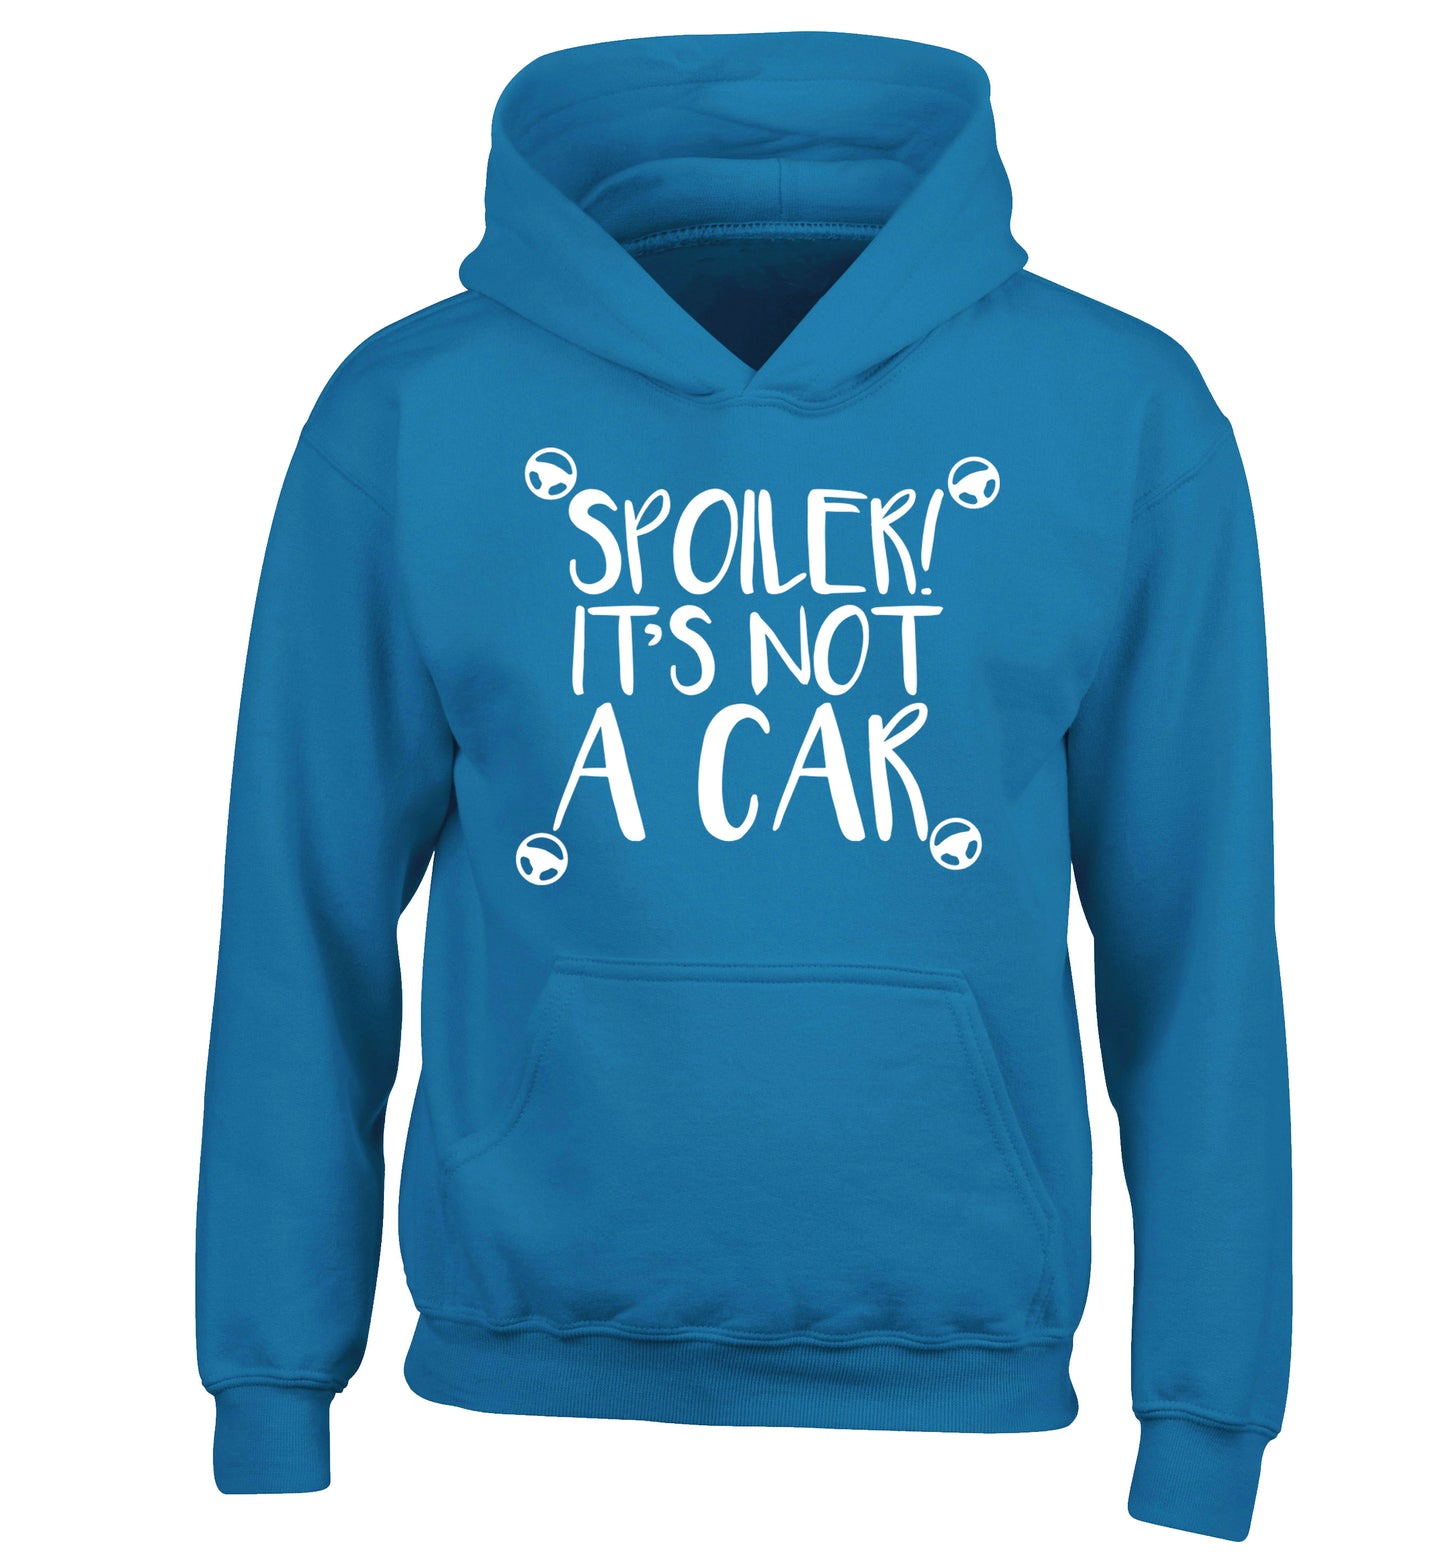 Spoiler it's not a car children's blue hoodie 12-13 Years